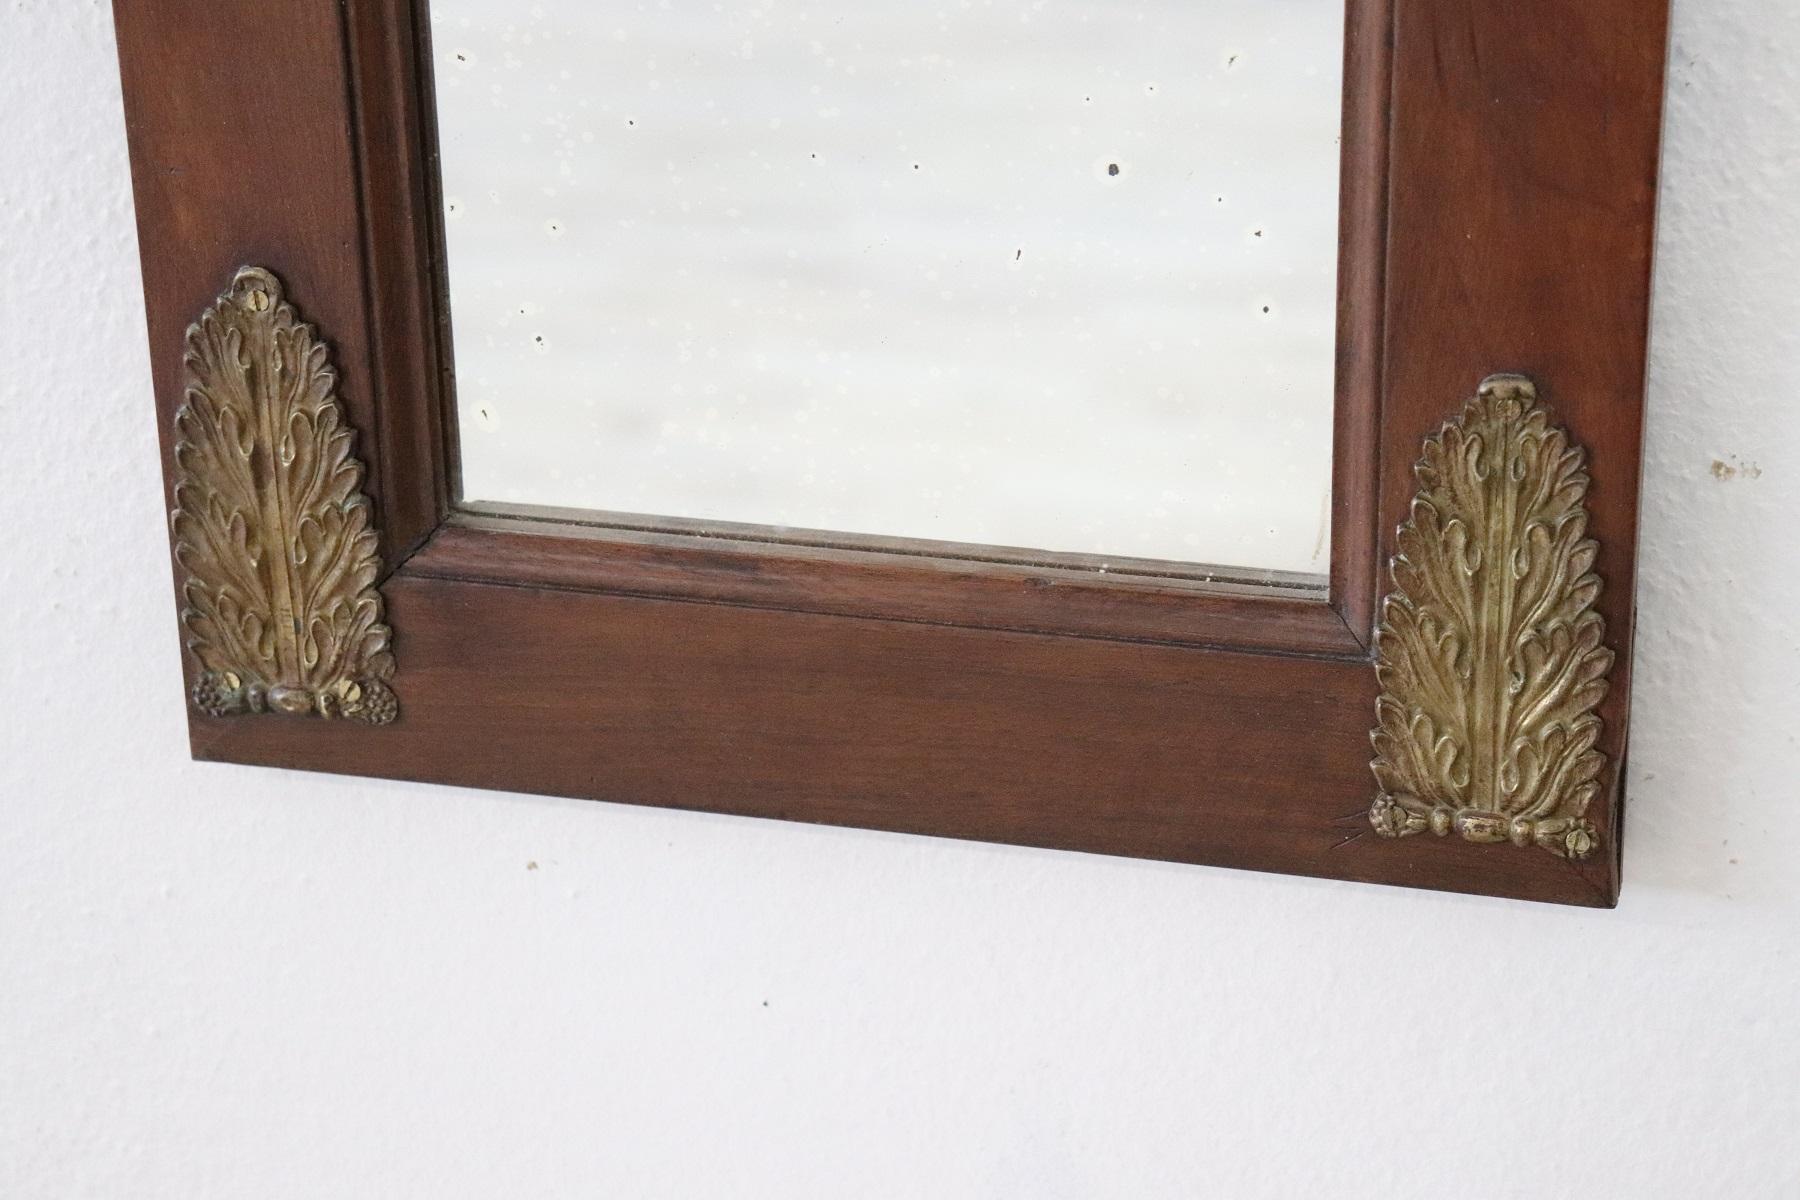 Carved 19th Century Italian Walnut Wood Wall Mirror with Gilded Bronze Decorations